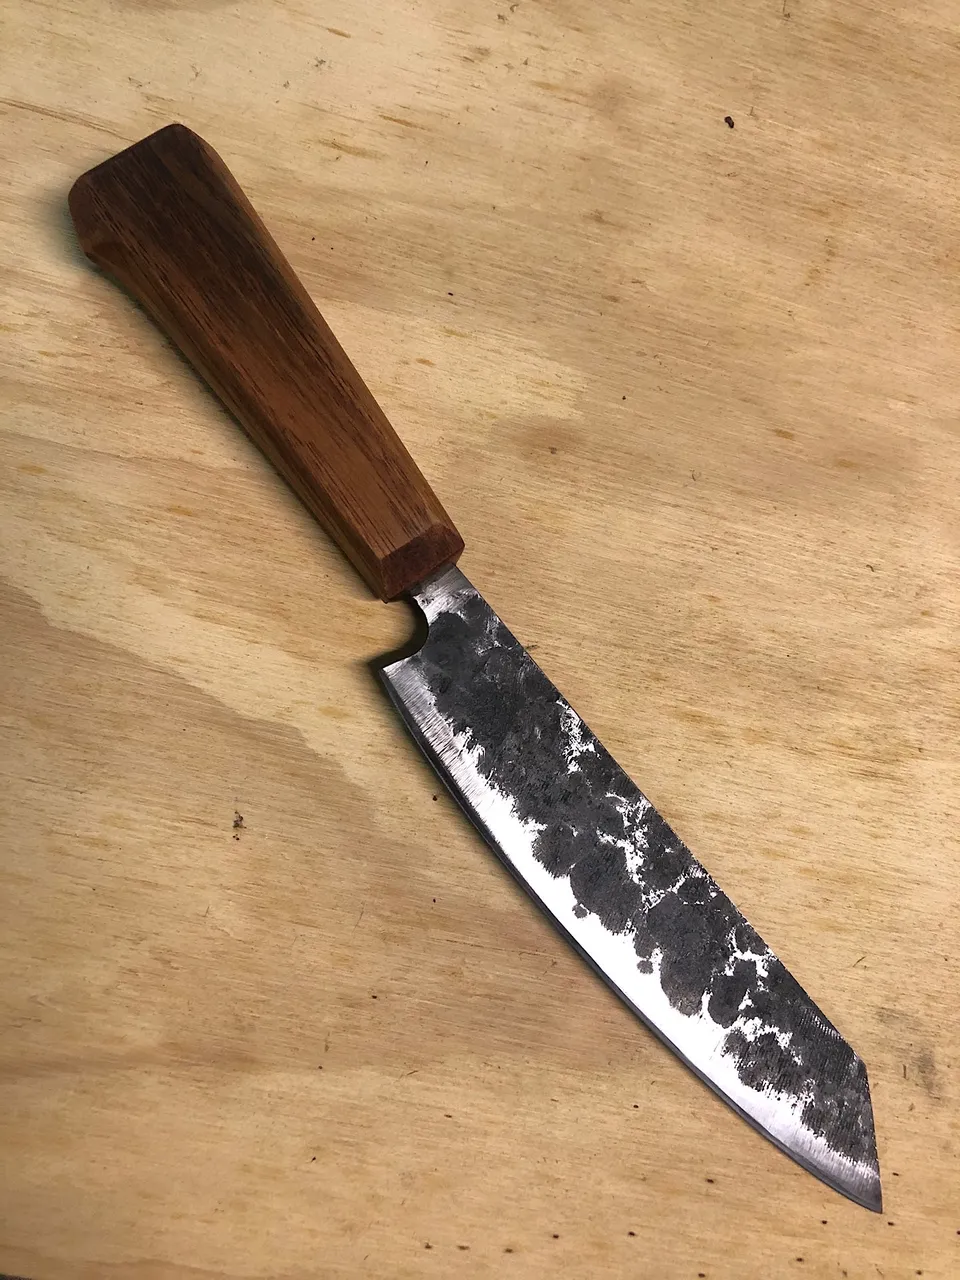 Homemade hand forged chef's knife